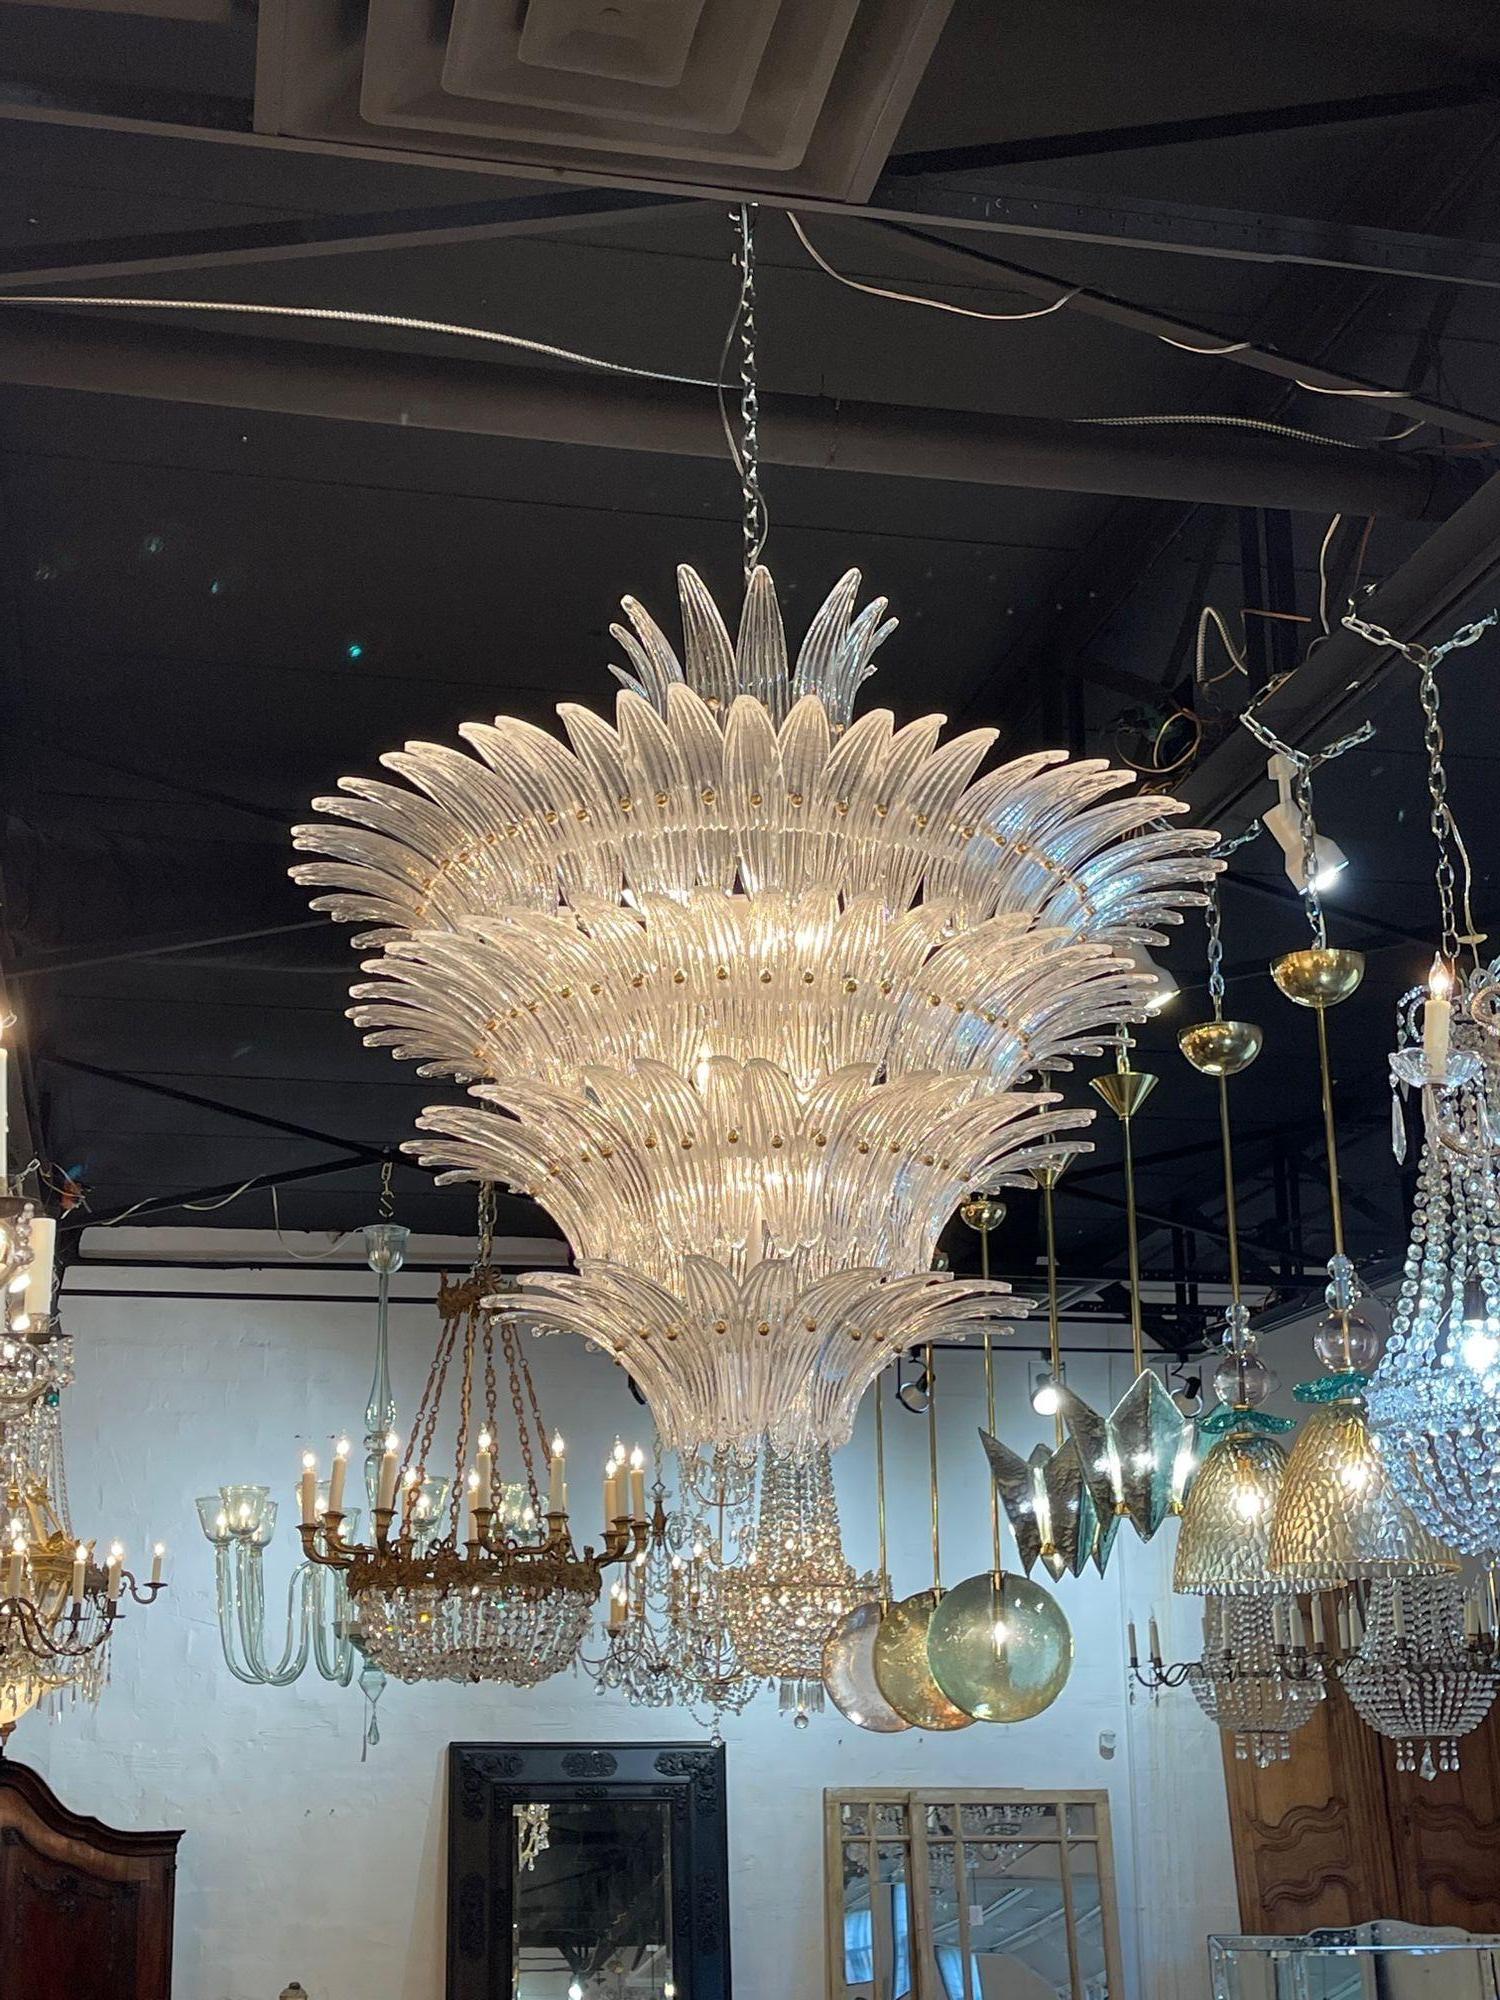 Exquisite Murano opalescent glass palm leaf chandelier with brass accents. Featuring beautiful layers of textured opalescent glass.  Creates a very impressive presence!   Gorgeous!!